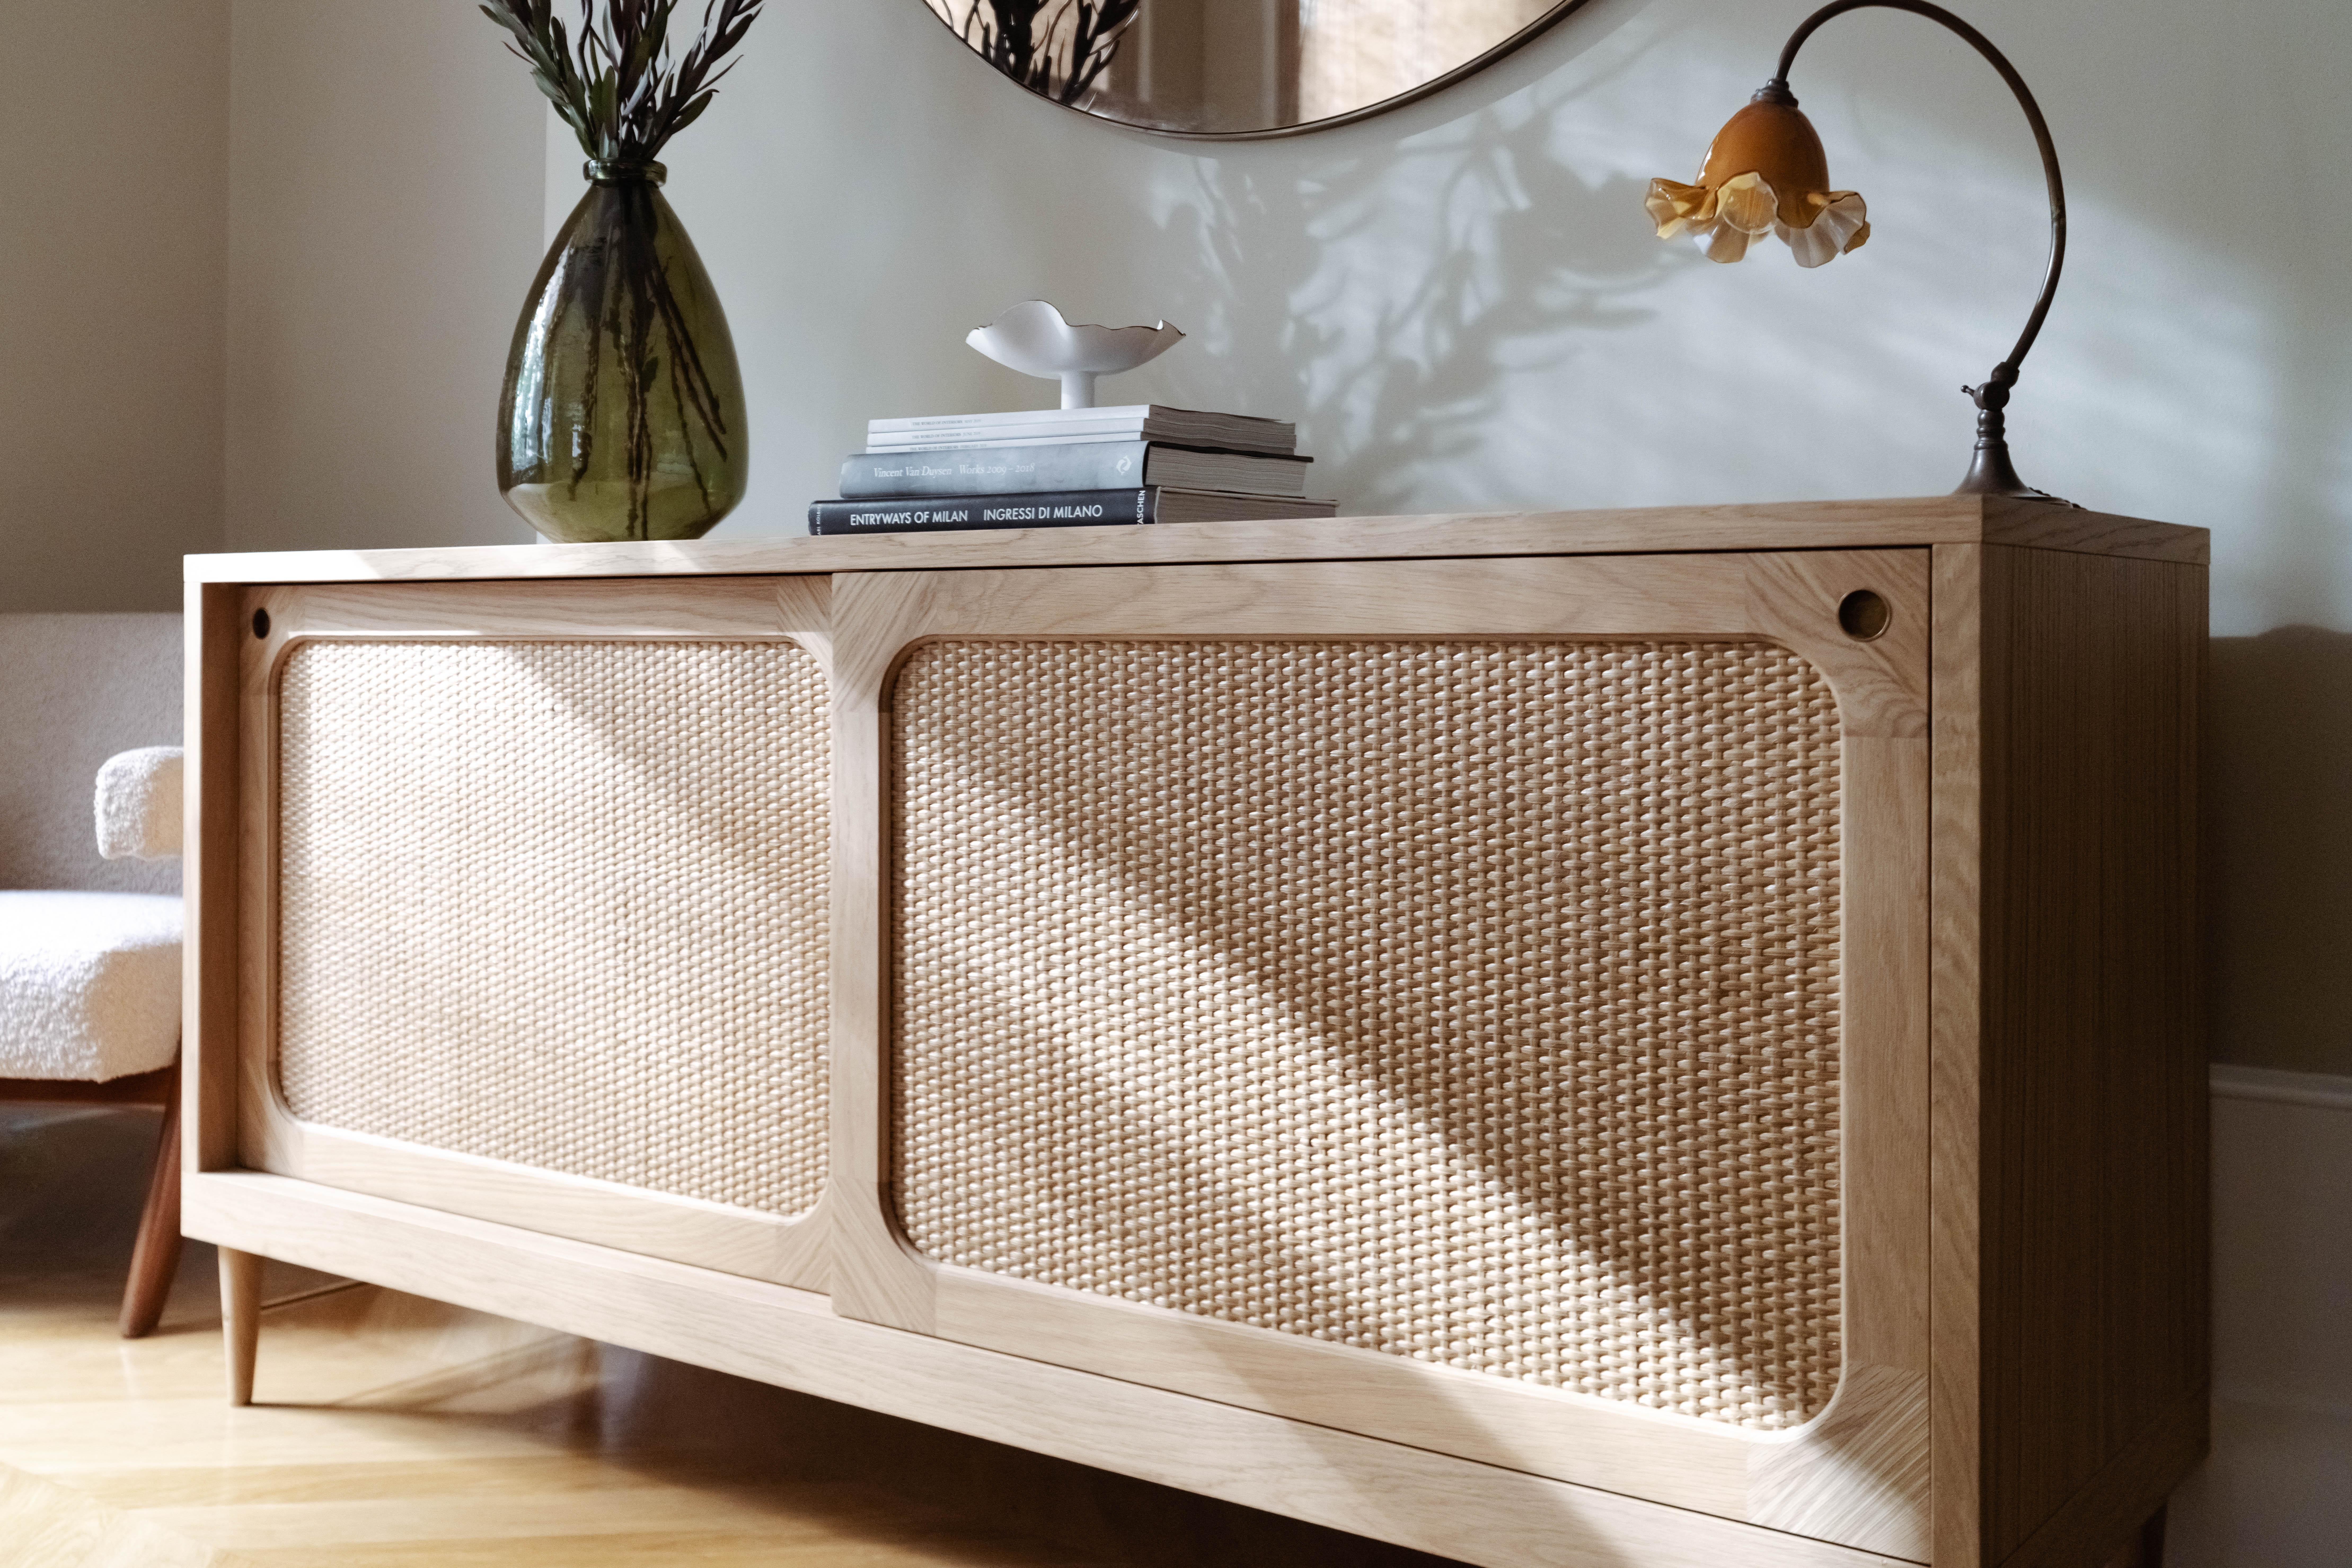 Sanders Sideboard in Natural Oak and Rattan — Large In New Condition For Sale In London, GB